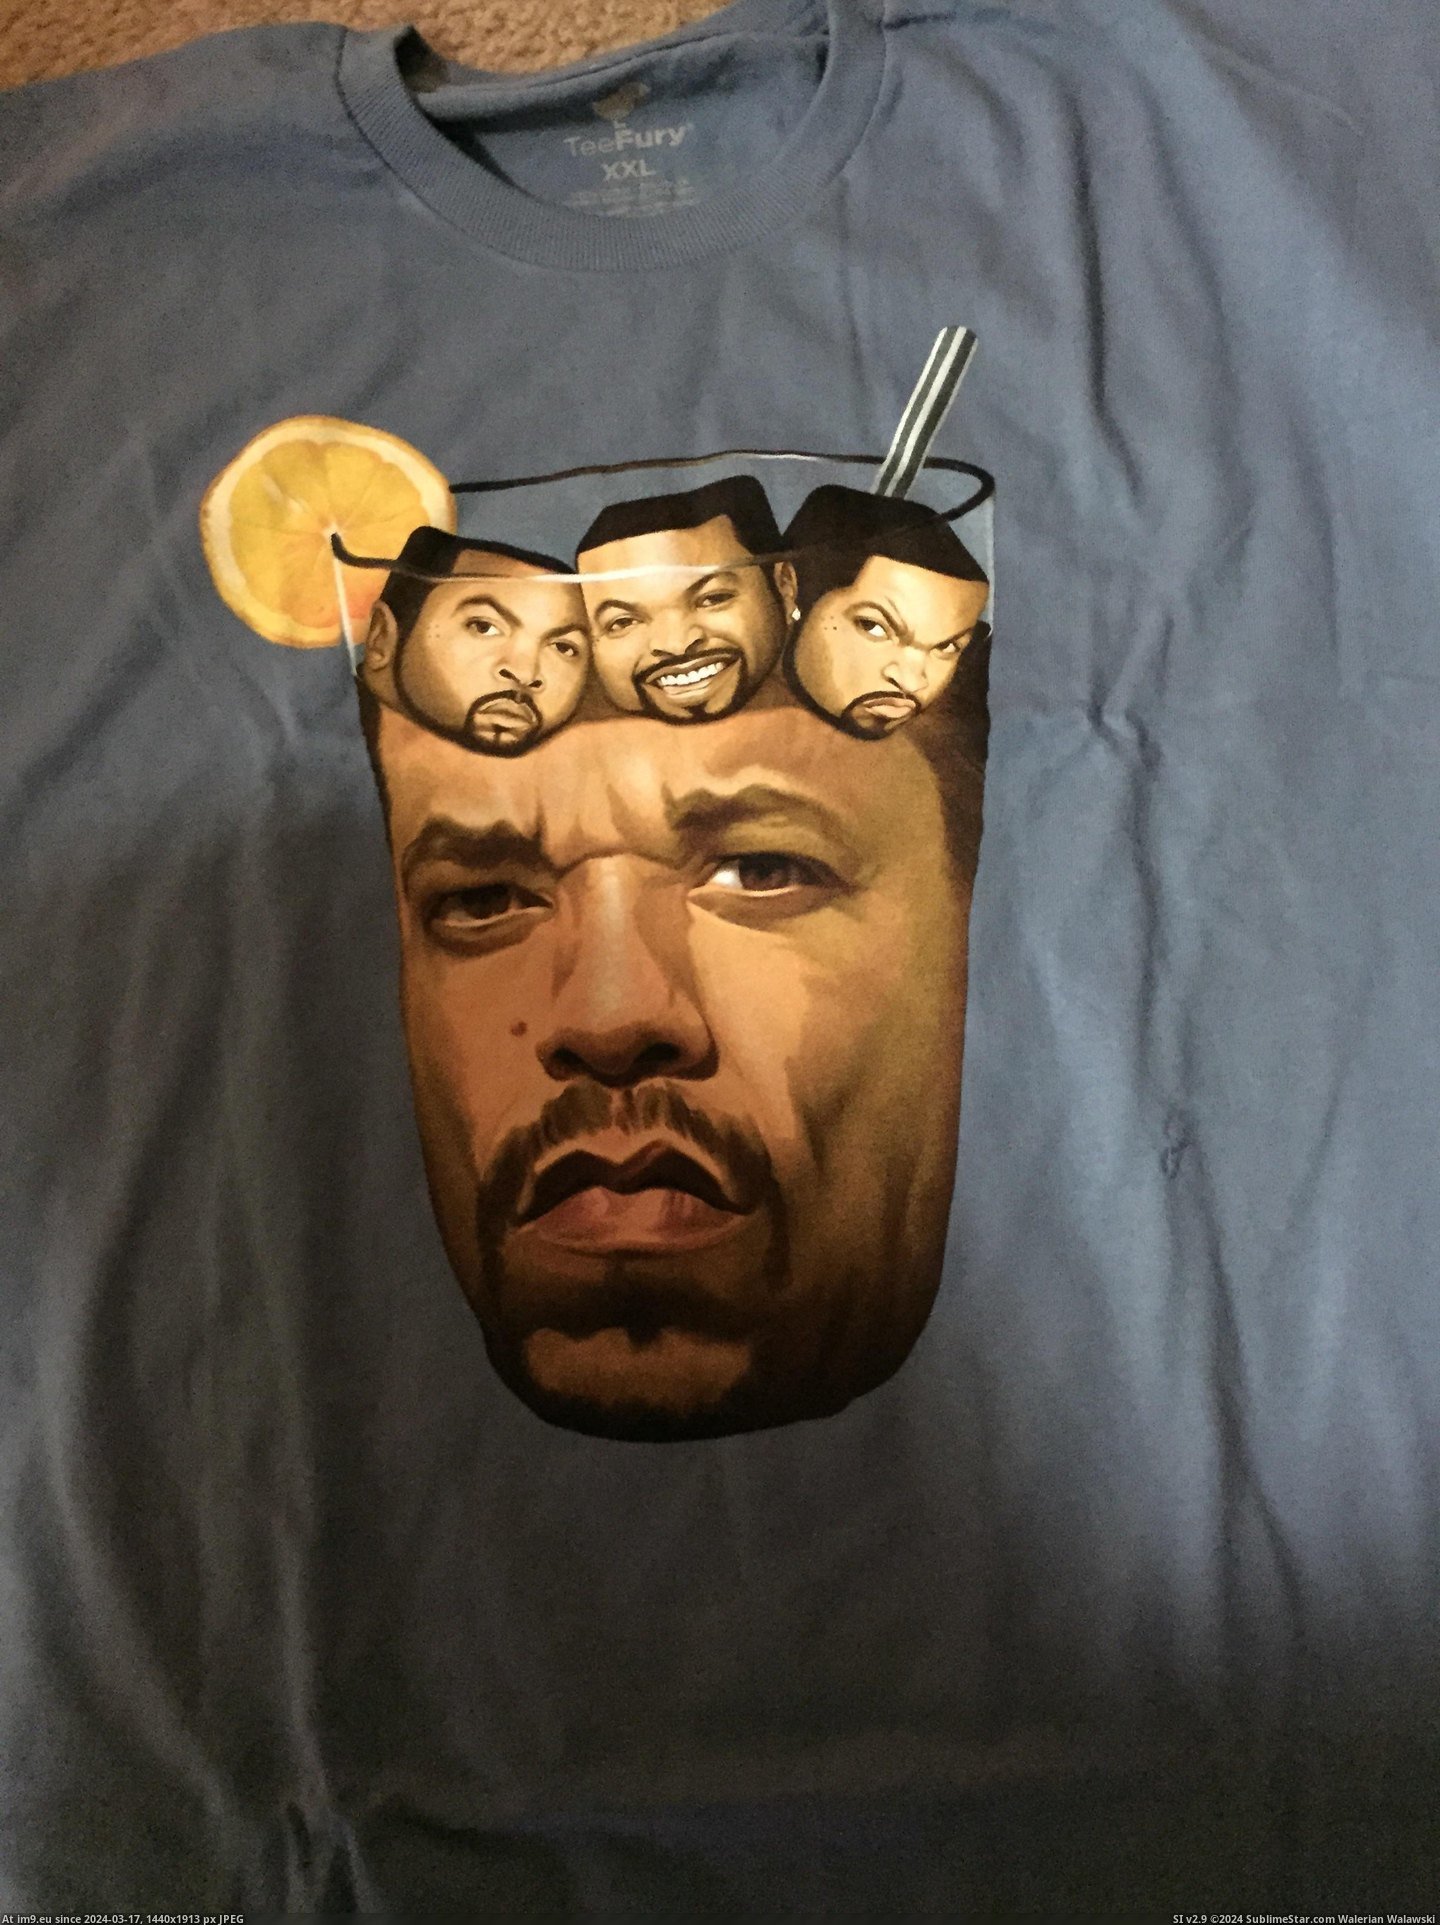 #Funny #Brother #Shirt [Funny] My brother's new shirt Pic. (Изображение из альбом My r/FUNNY favs))